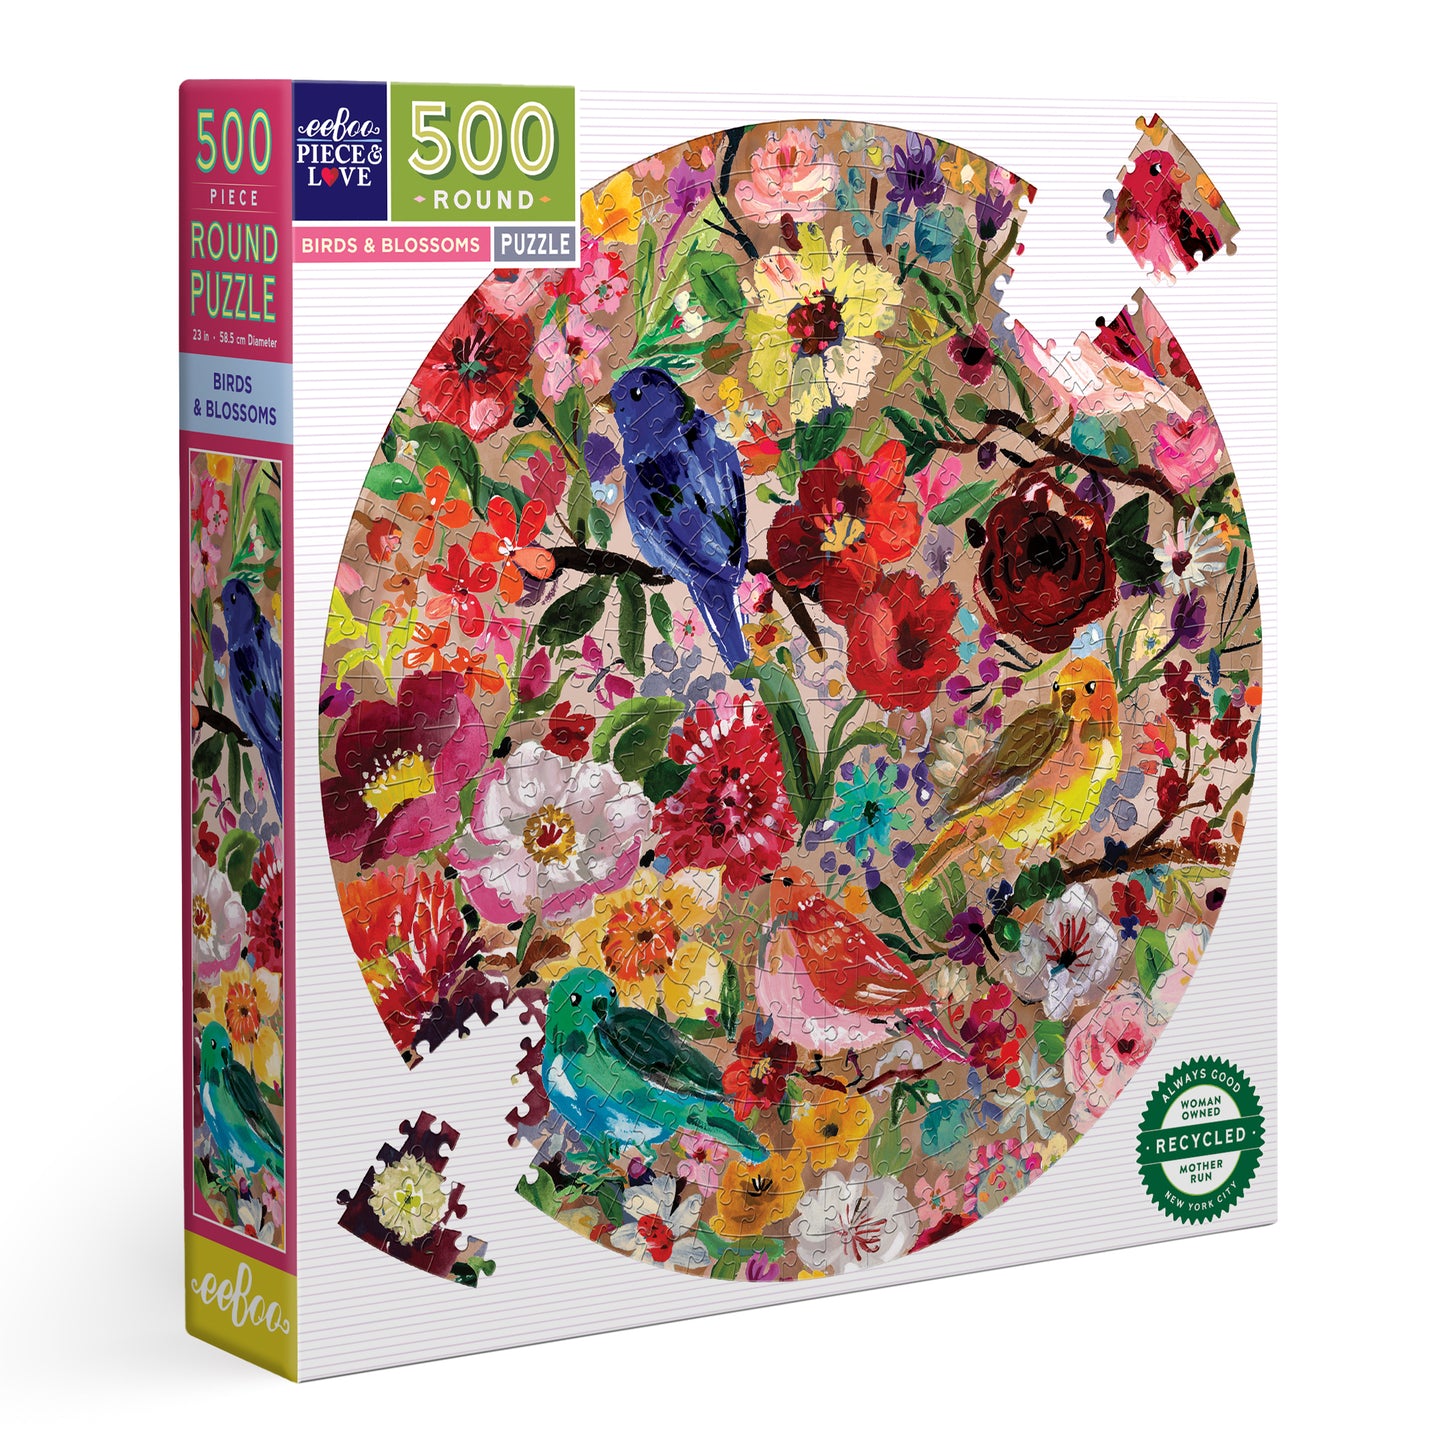 Birds & Blossoms 500 Piece Round Jigsaw Puzzle | Beautiful Unique Gift for Bird & Garden Lovers